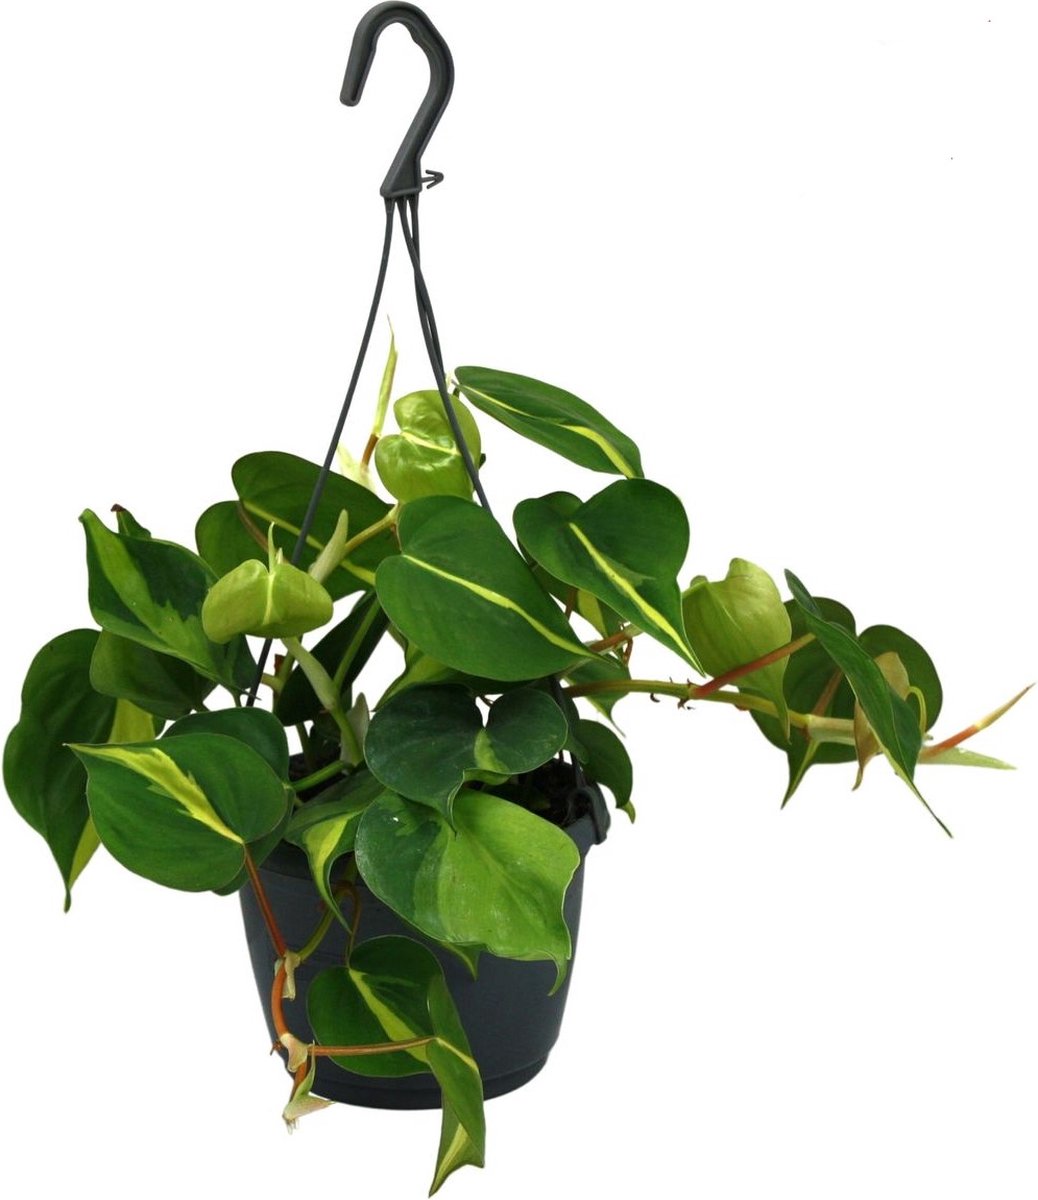 Philodendron Scandens hangplant